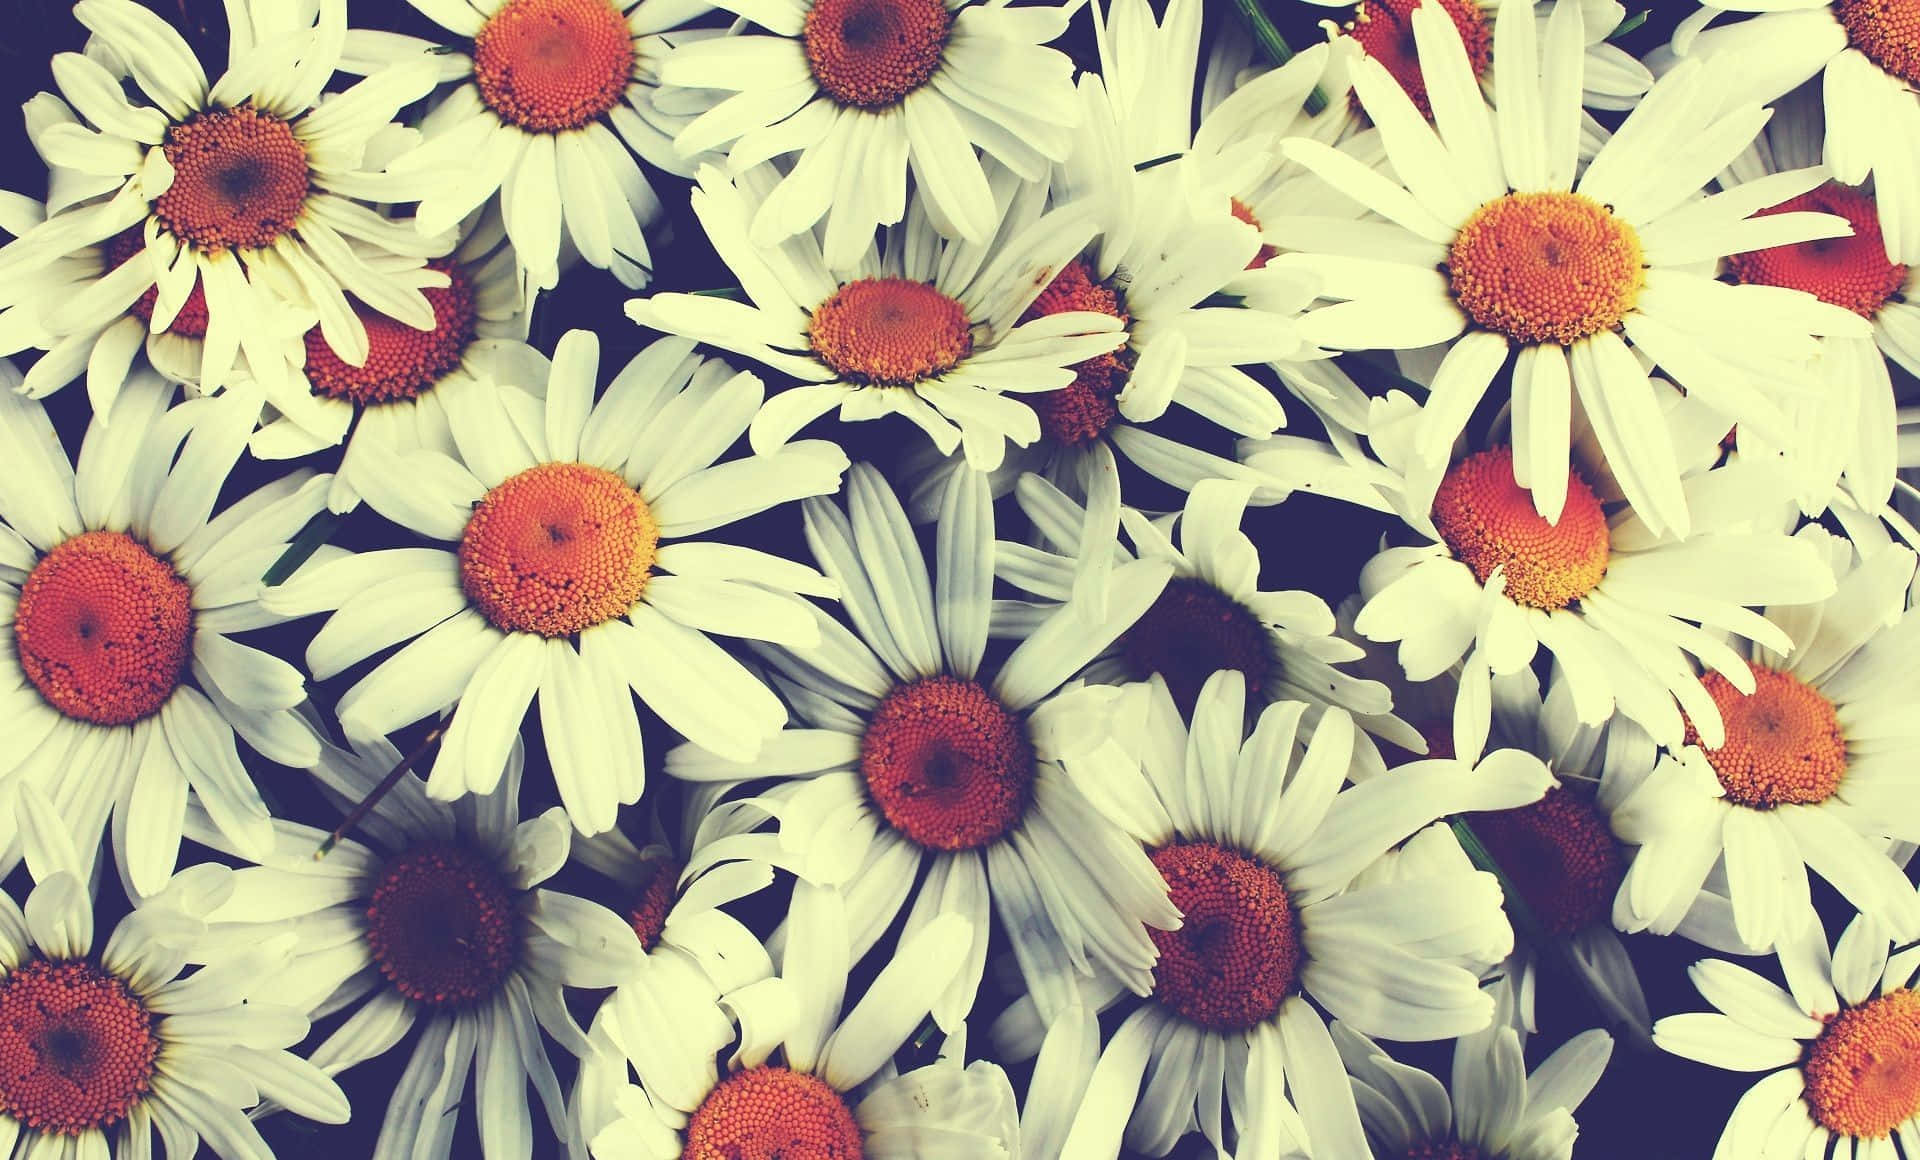 a close up of white daisies with orange centers Wallpaper